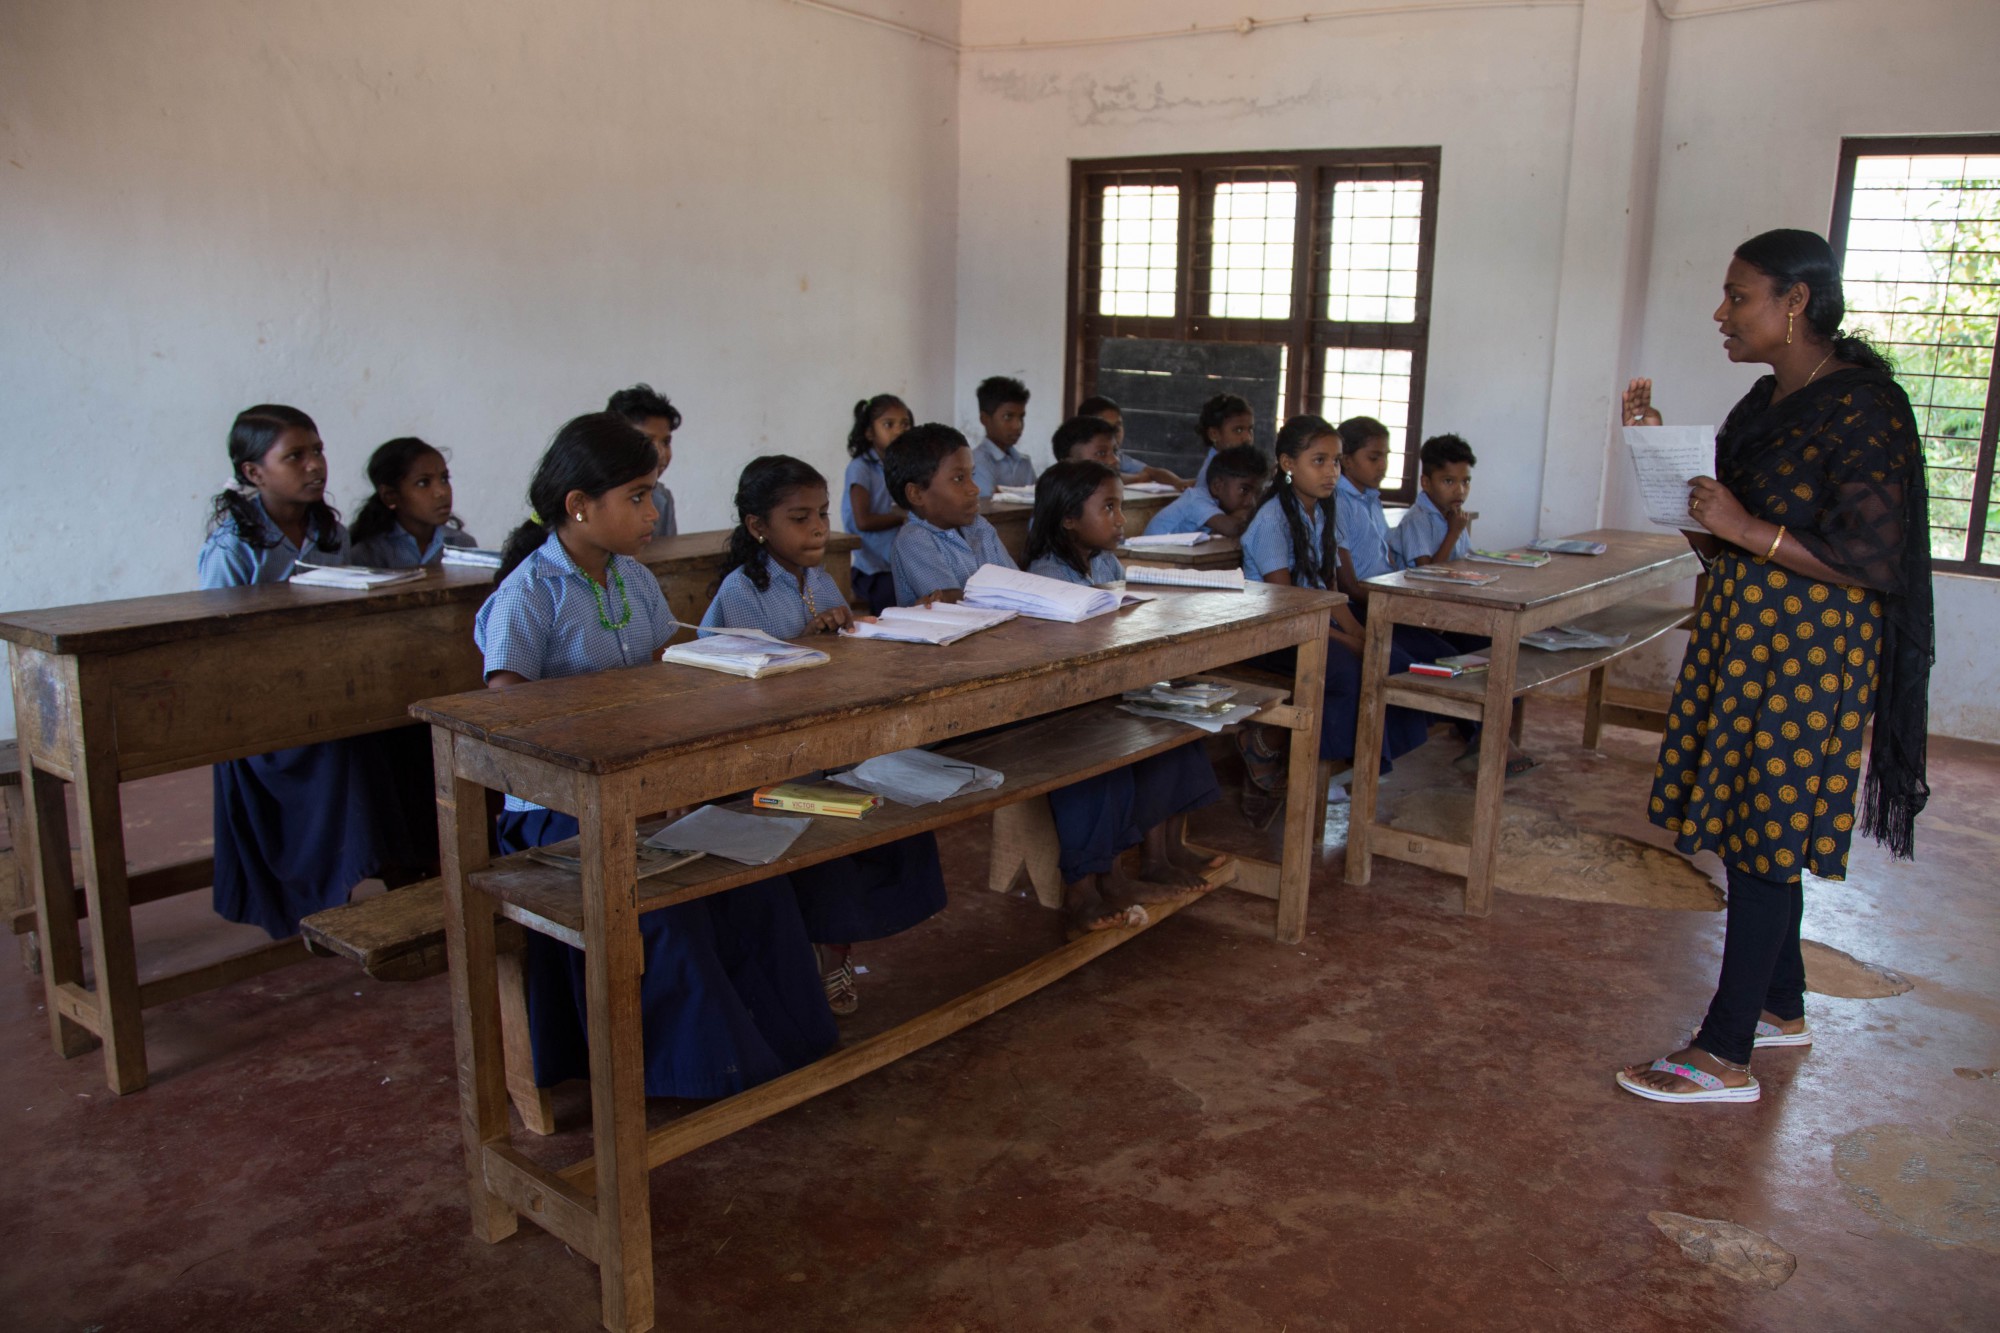 Education is free for the students. They receive books, pens, medical care, food and accommodation. The classrooms are very simple: a few wooden benches and a blackboard.